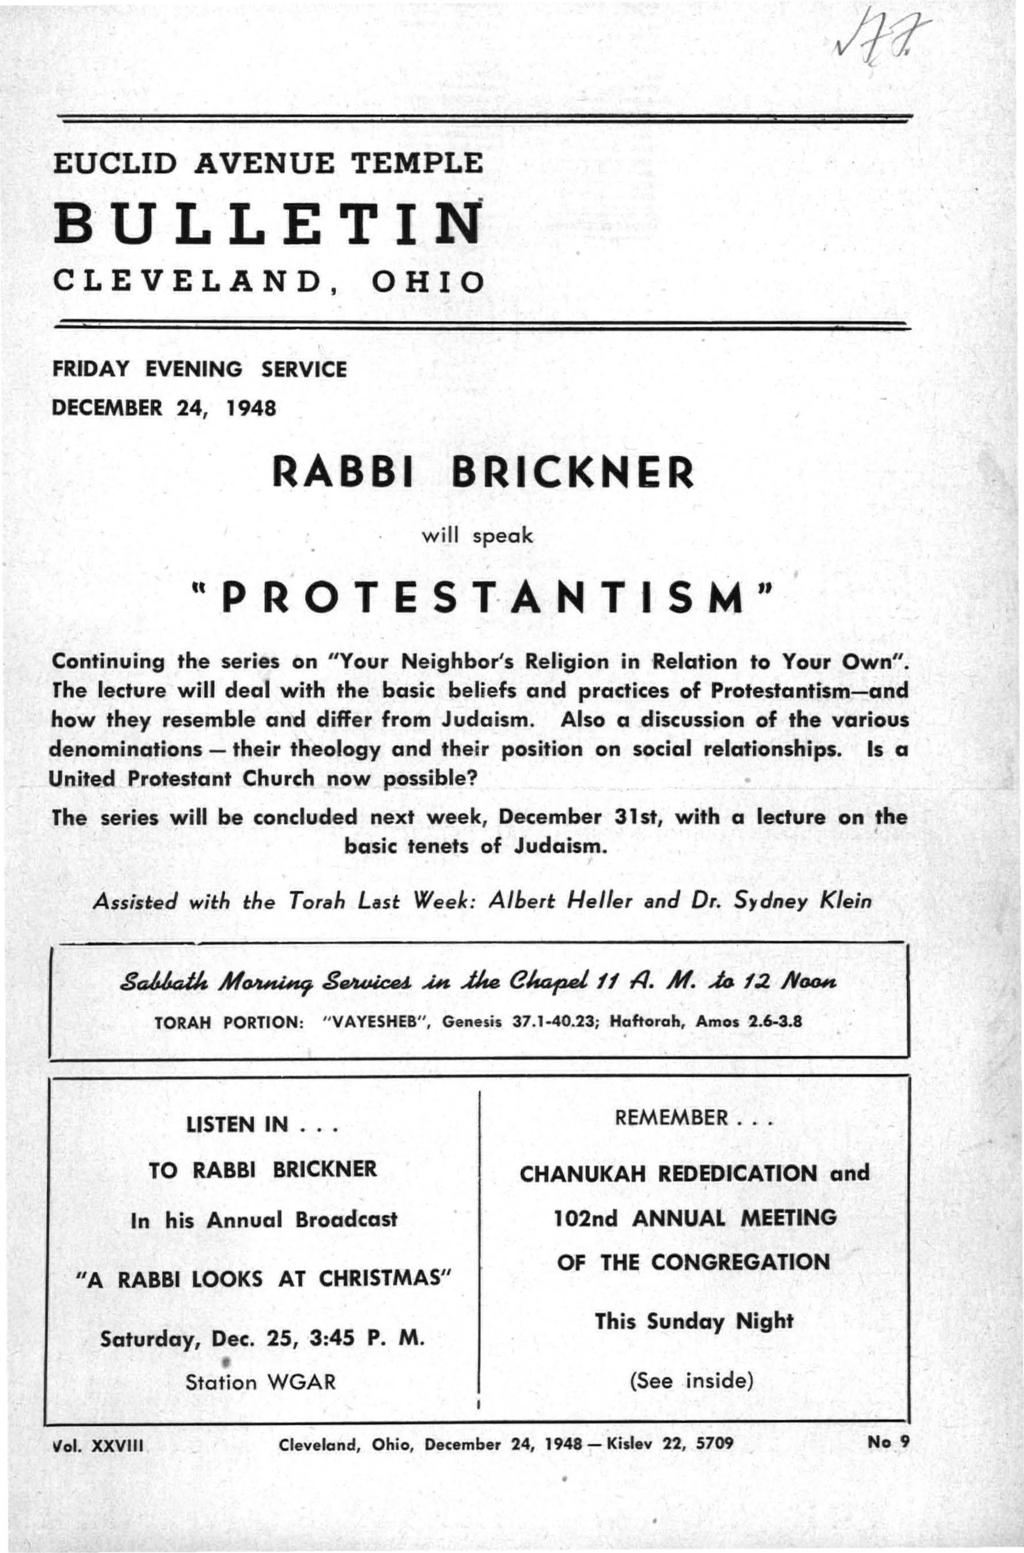 EUCLID AVENUE TEMPLE B'U LLE TI N CLEVELAND, OHIO FRIDAY EVENING SERVICE DECEMBER 24, 1948 RABBI BRICKNER will speak " P R' 0 T E S T-ANT ISM " Continuing the series on "Your Neighbor's Religion in